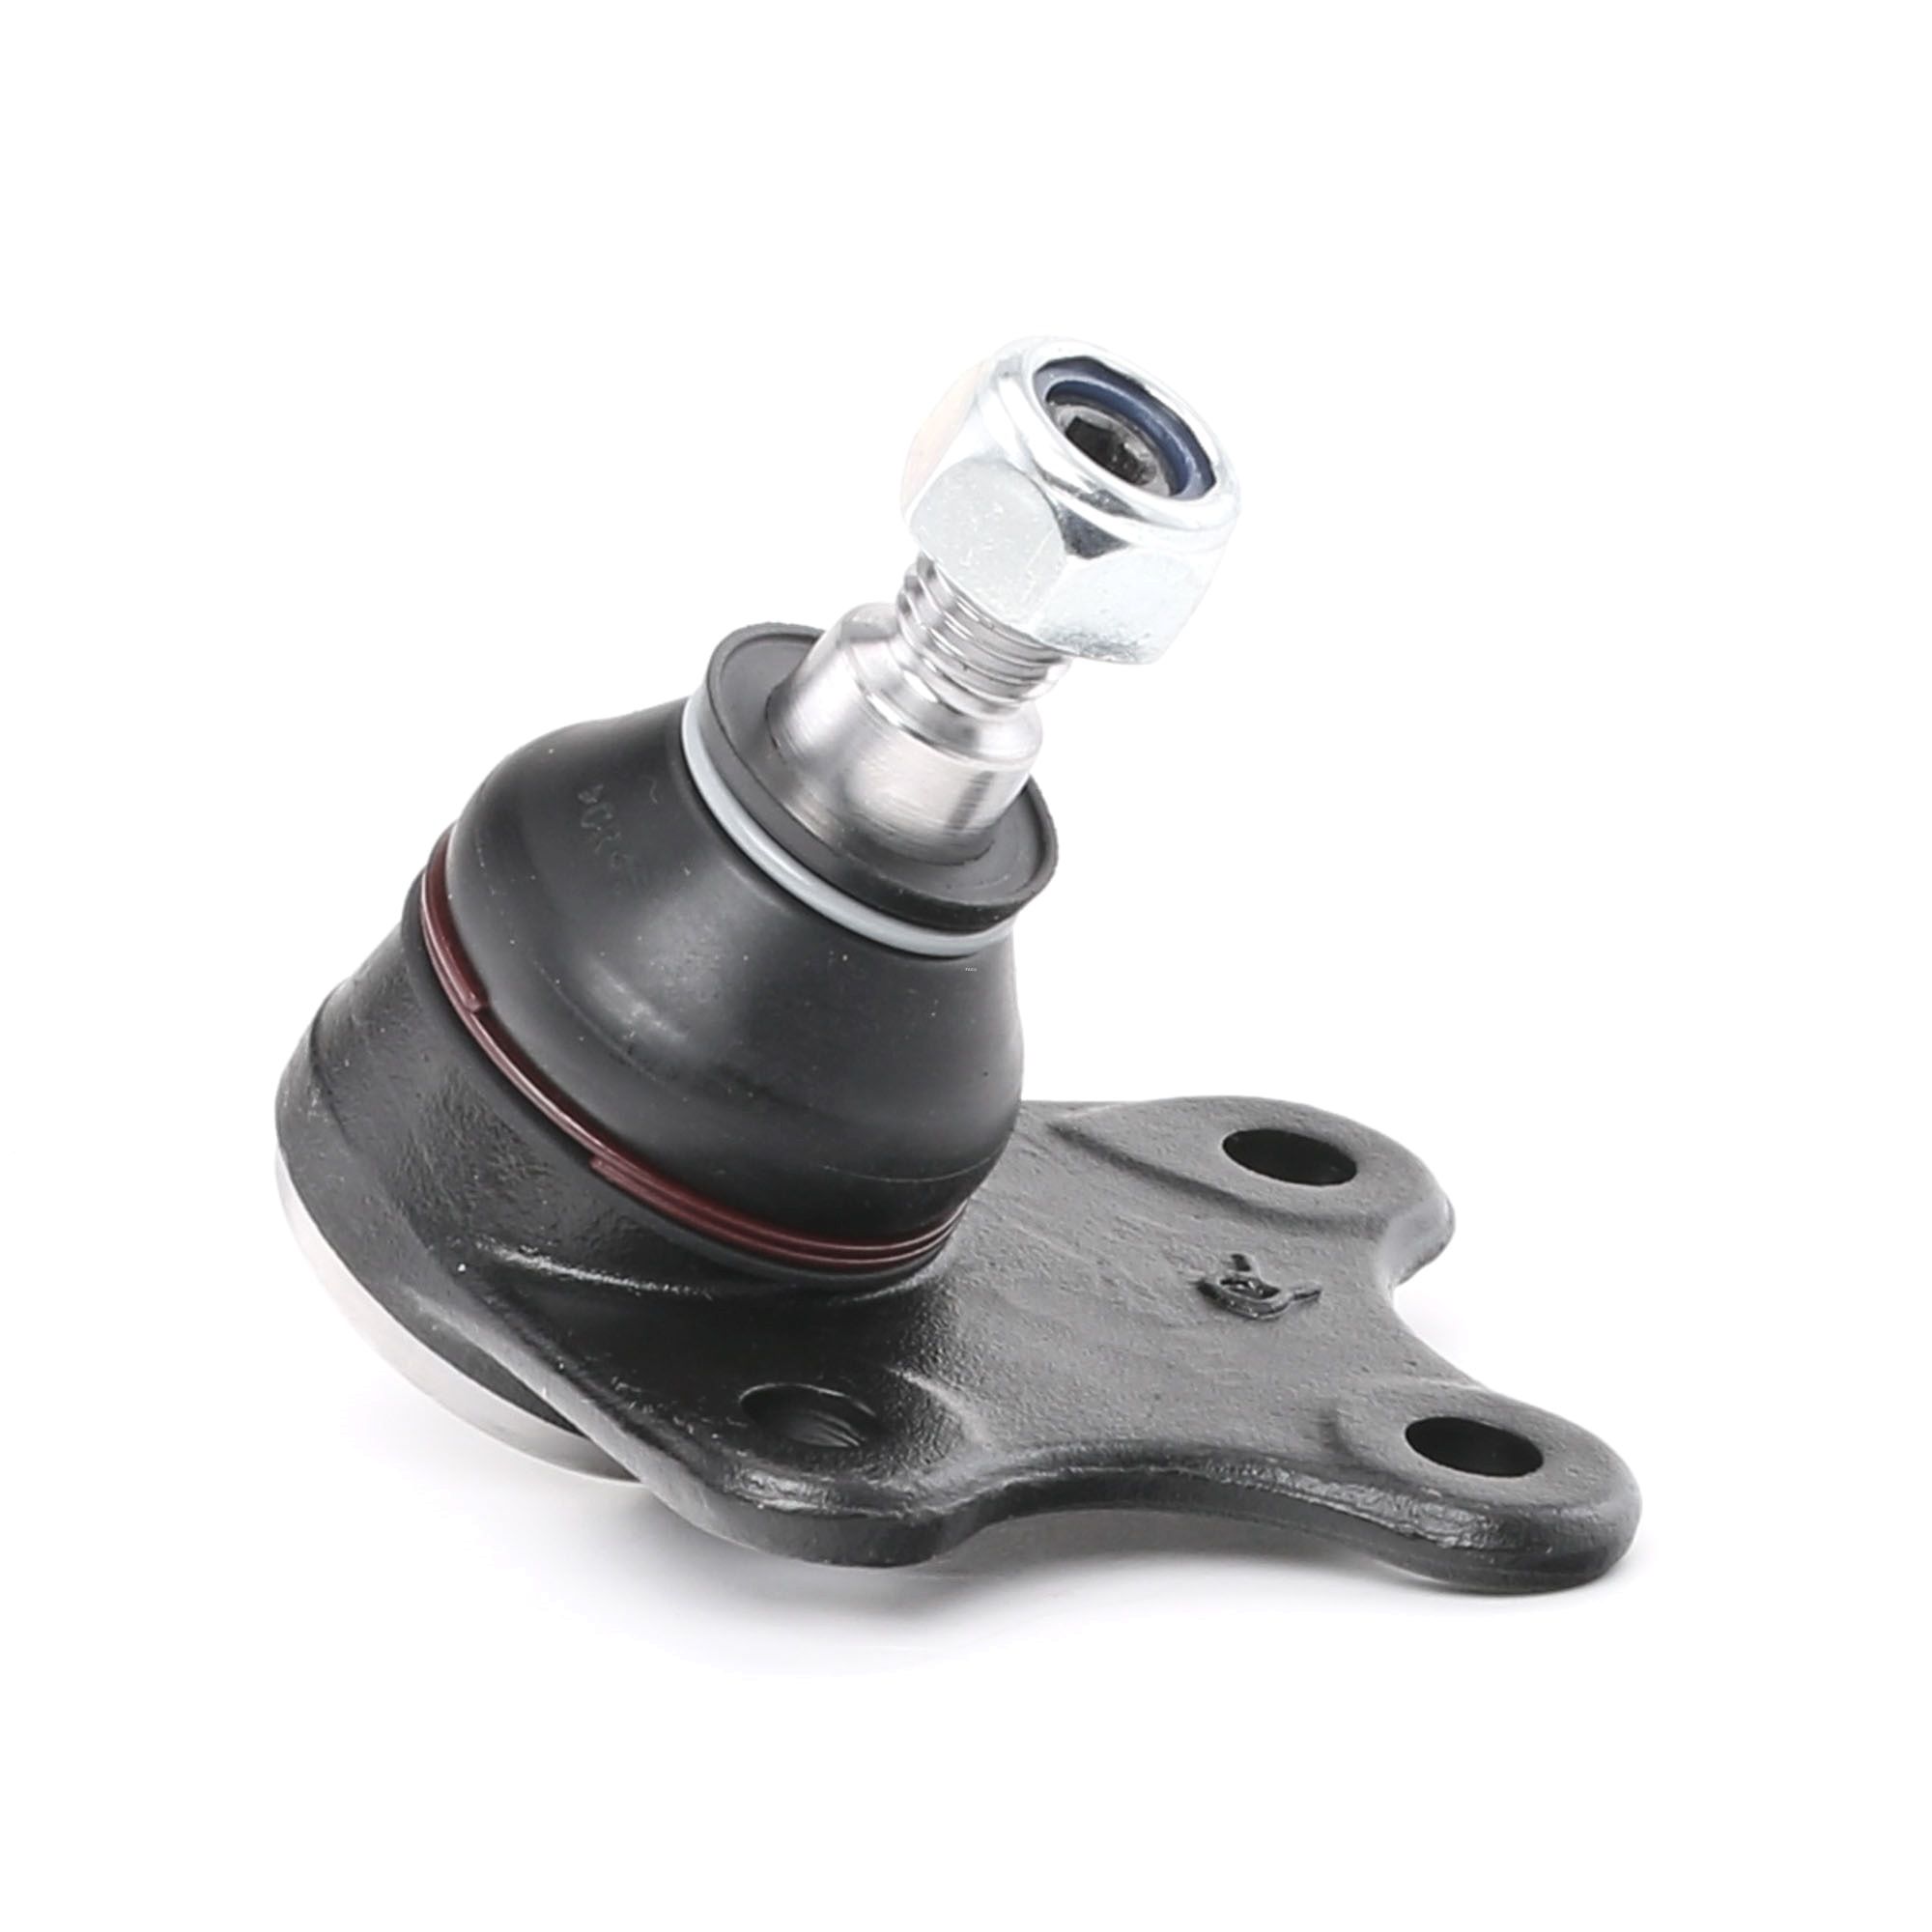 FAG 15mm Cone Size: 15mm Suspension ball joint 825 0055 10 buy